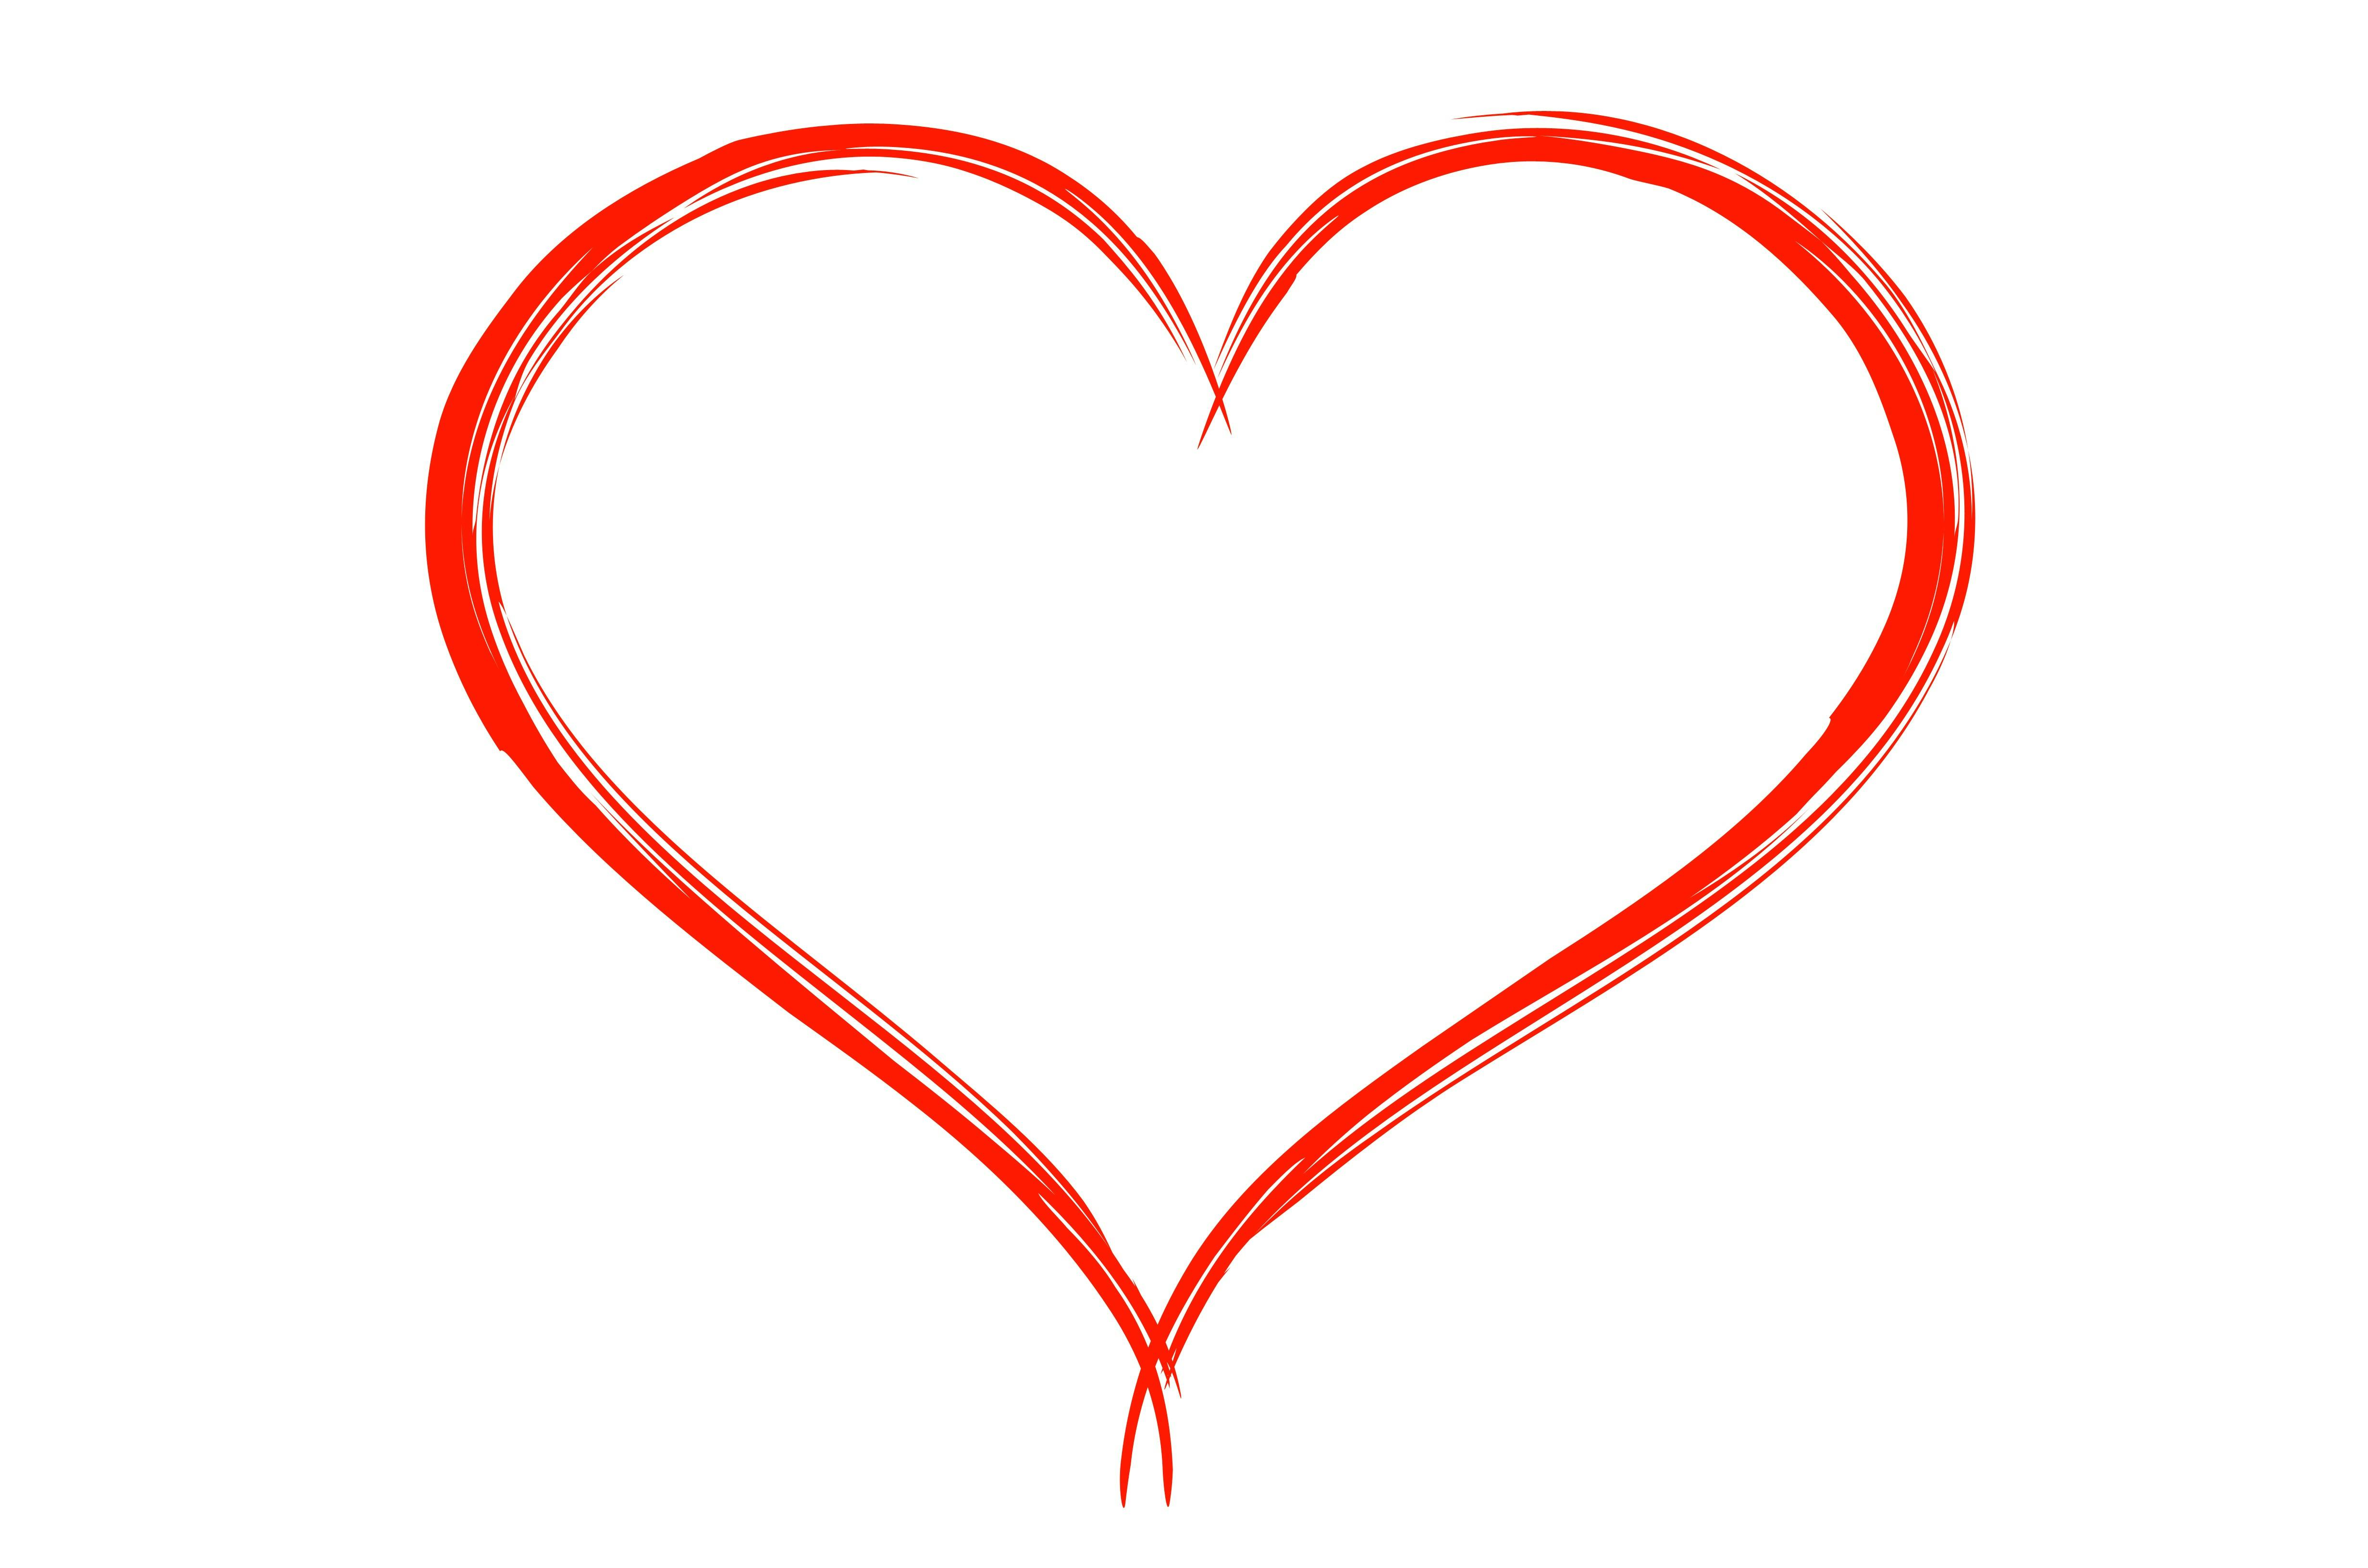 red heart on a white background royalty free vector image on heart in white background